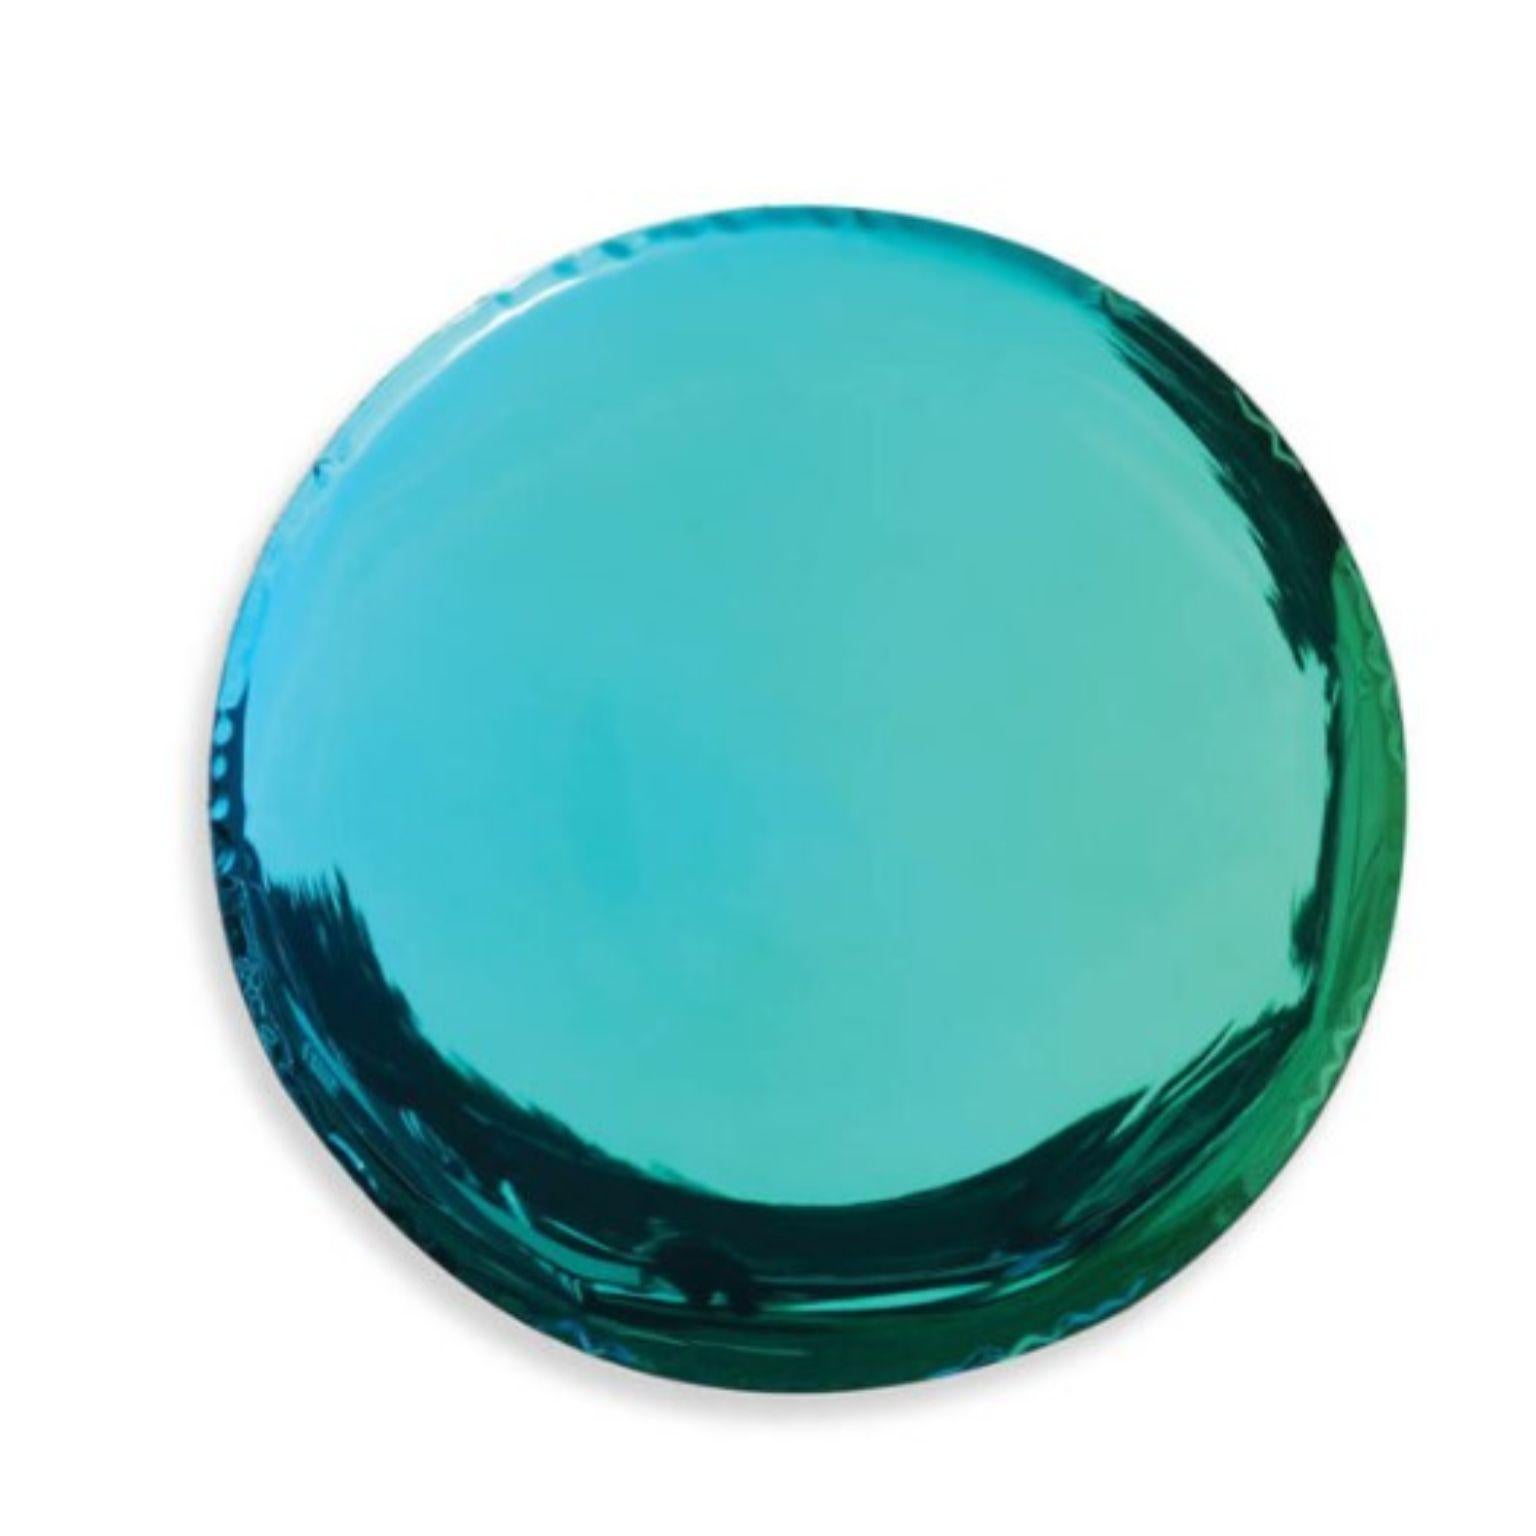 Emerald sapphire Oko 36 sculptural wall mirror by Zieta
Dimensions: Diameter 36 x Depth 6 cm 
Material: Stainless steel. 
Finish: Sapphire/emerald.
Available in finishes: stainless steel, deep space blue, emerald, sapphire, sapphire/emerald, dark